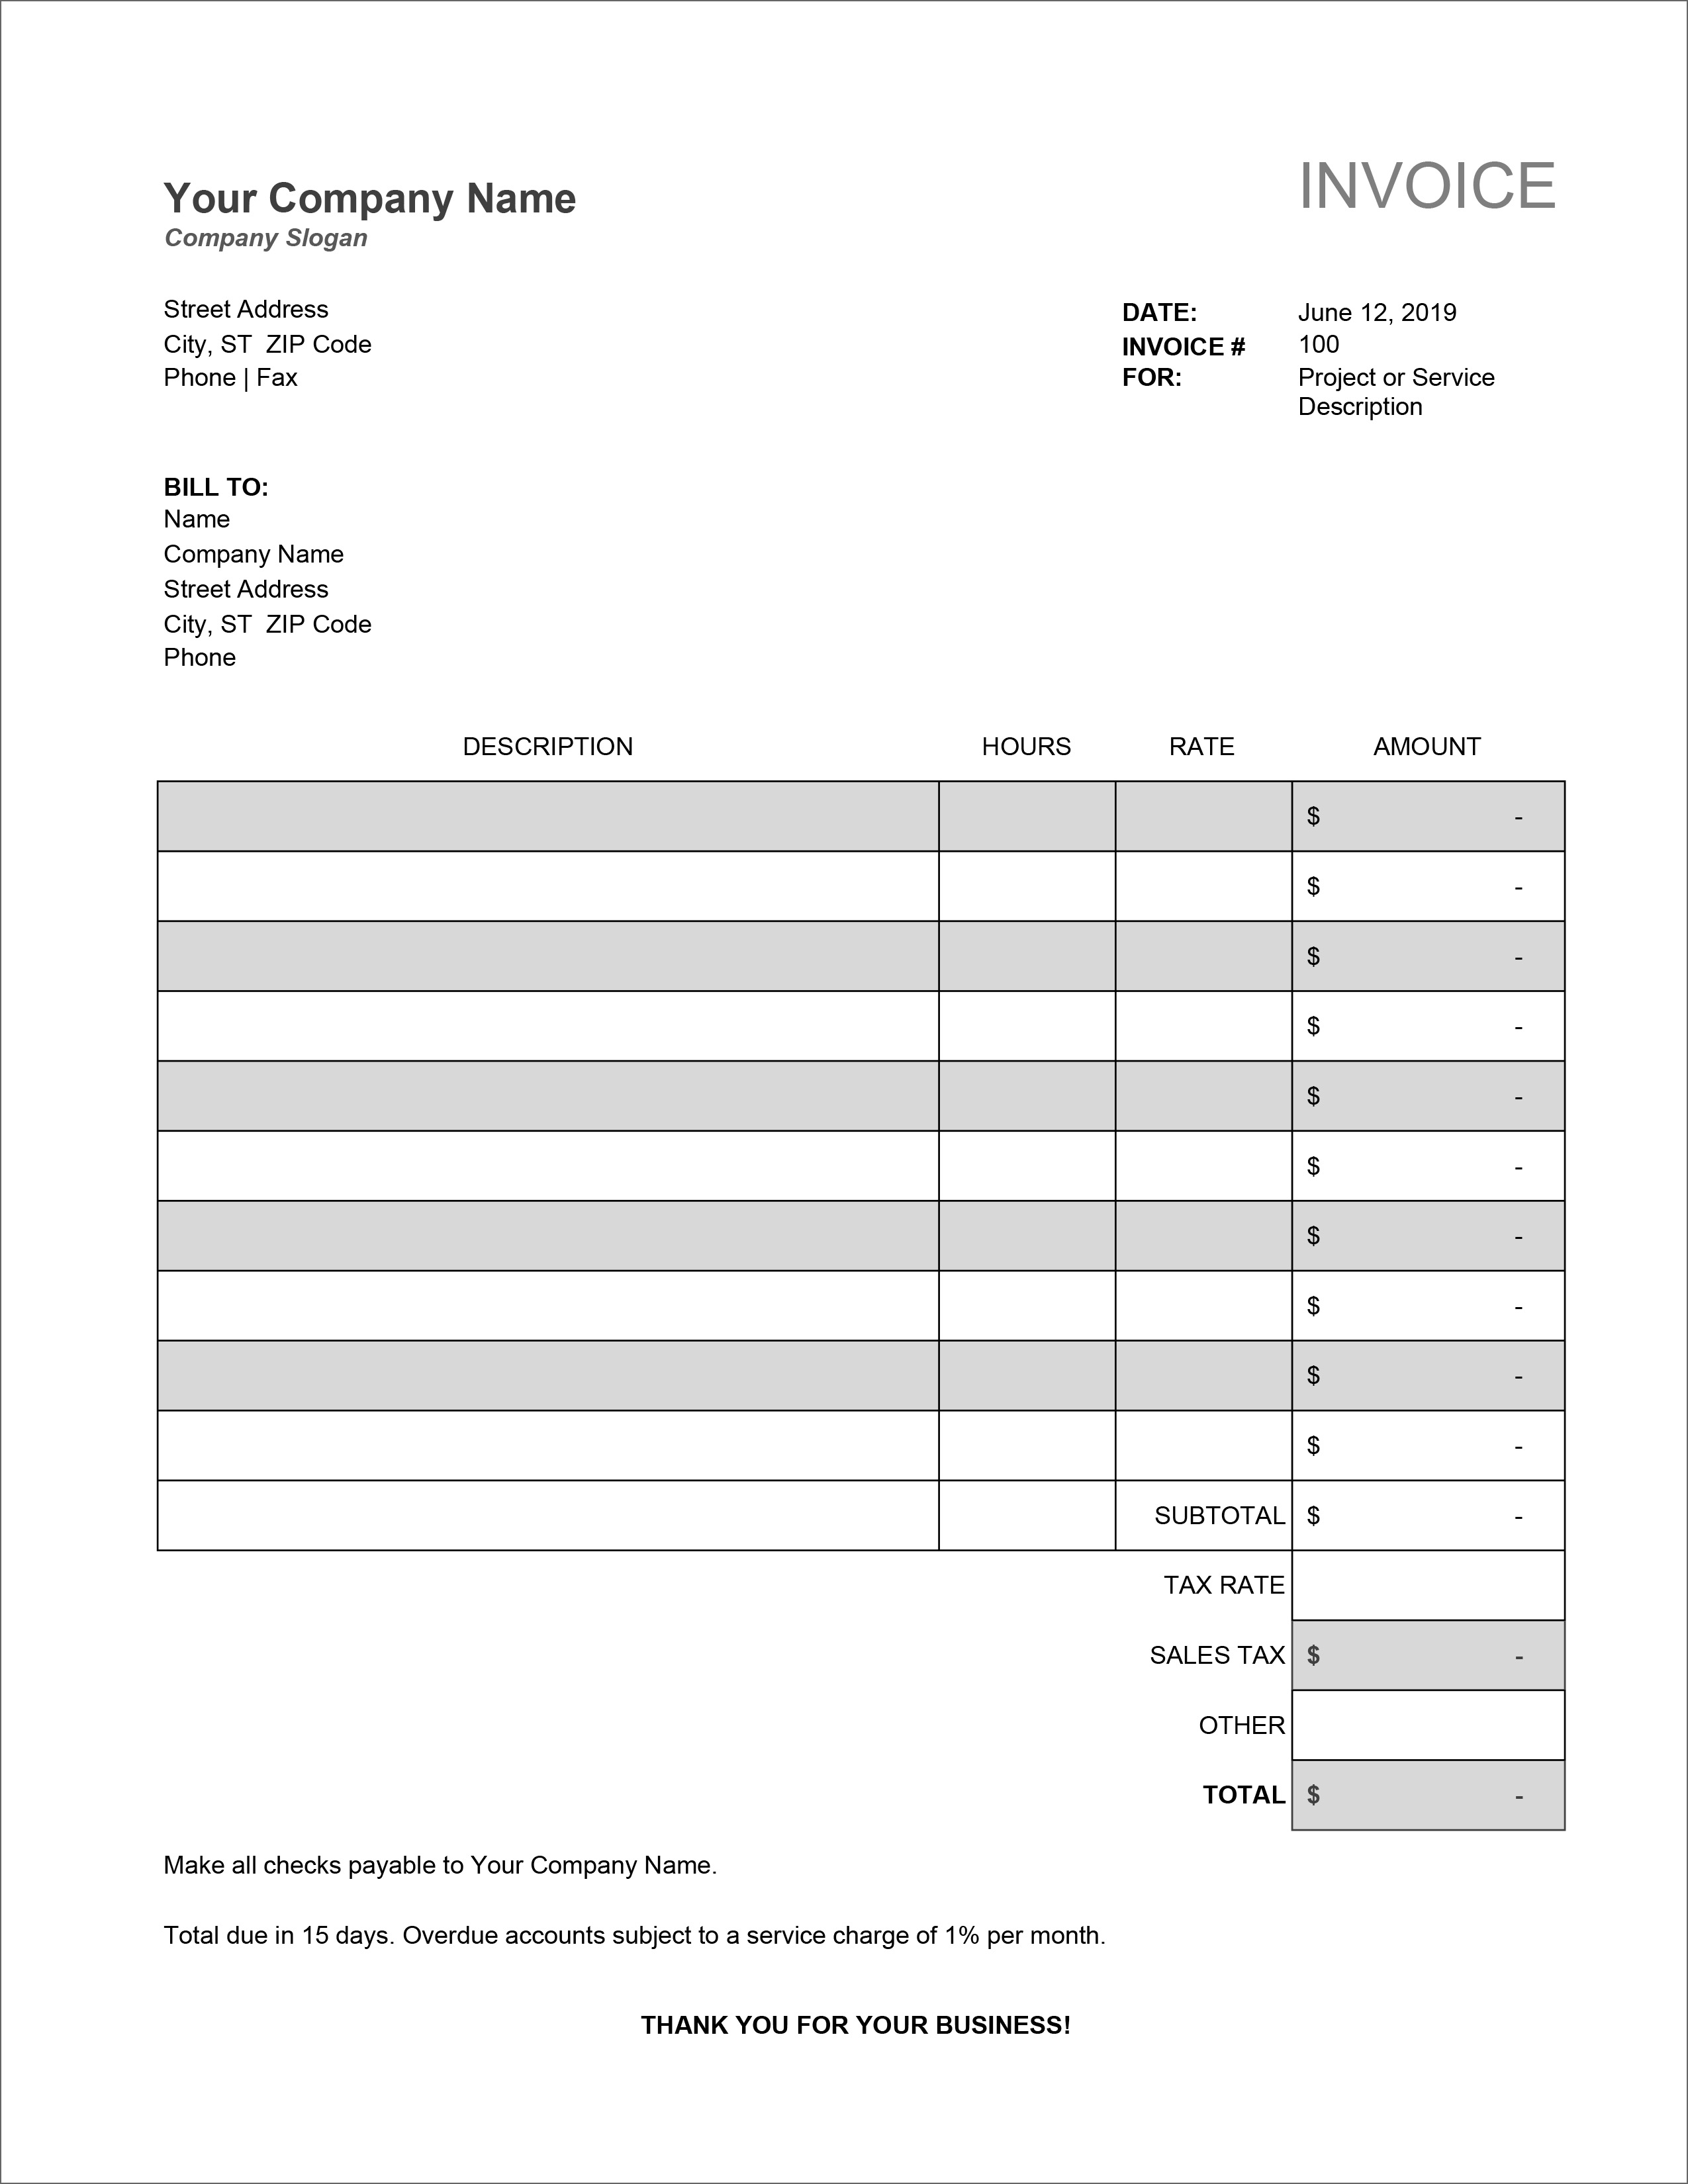 microsoft-office-blank-invoice-template-cards-design-templates